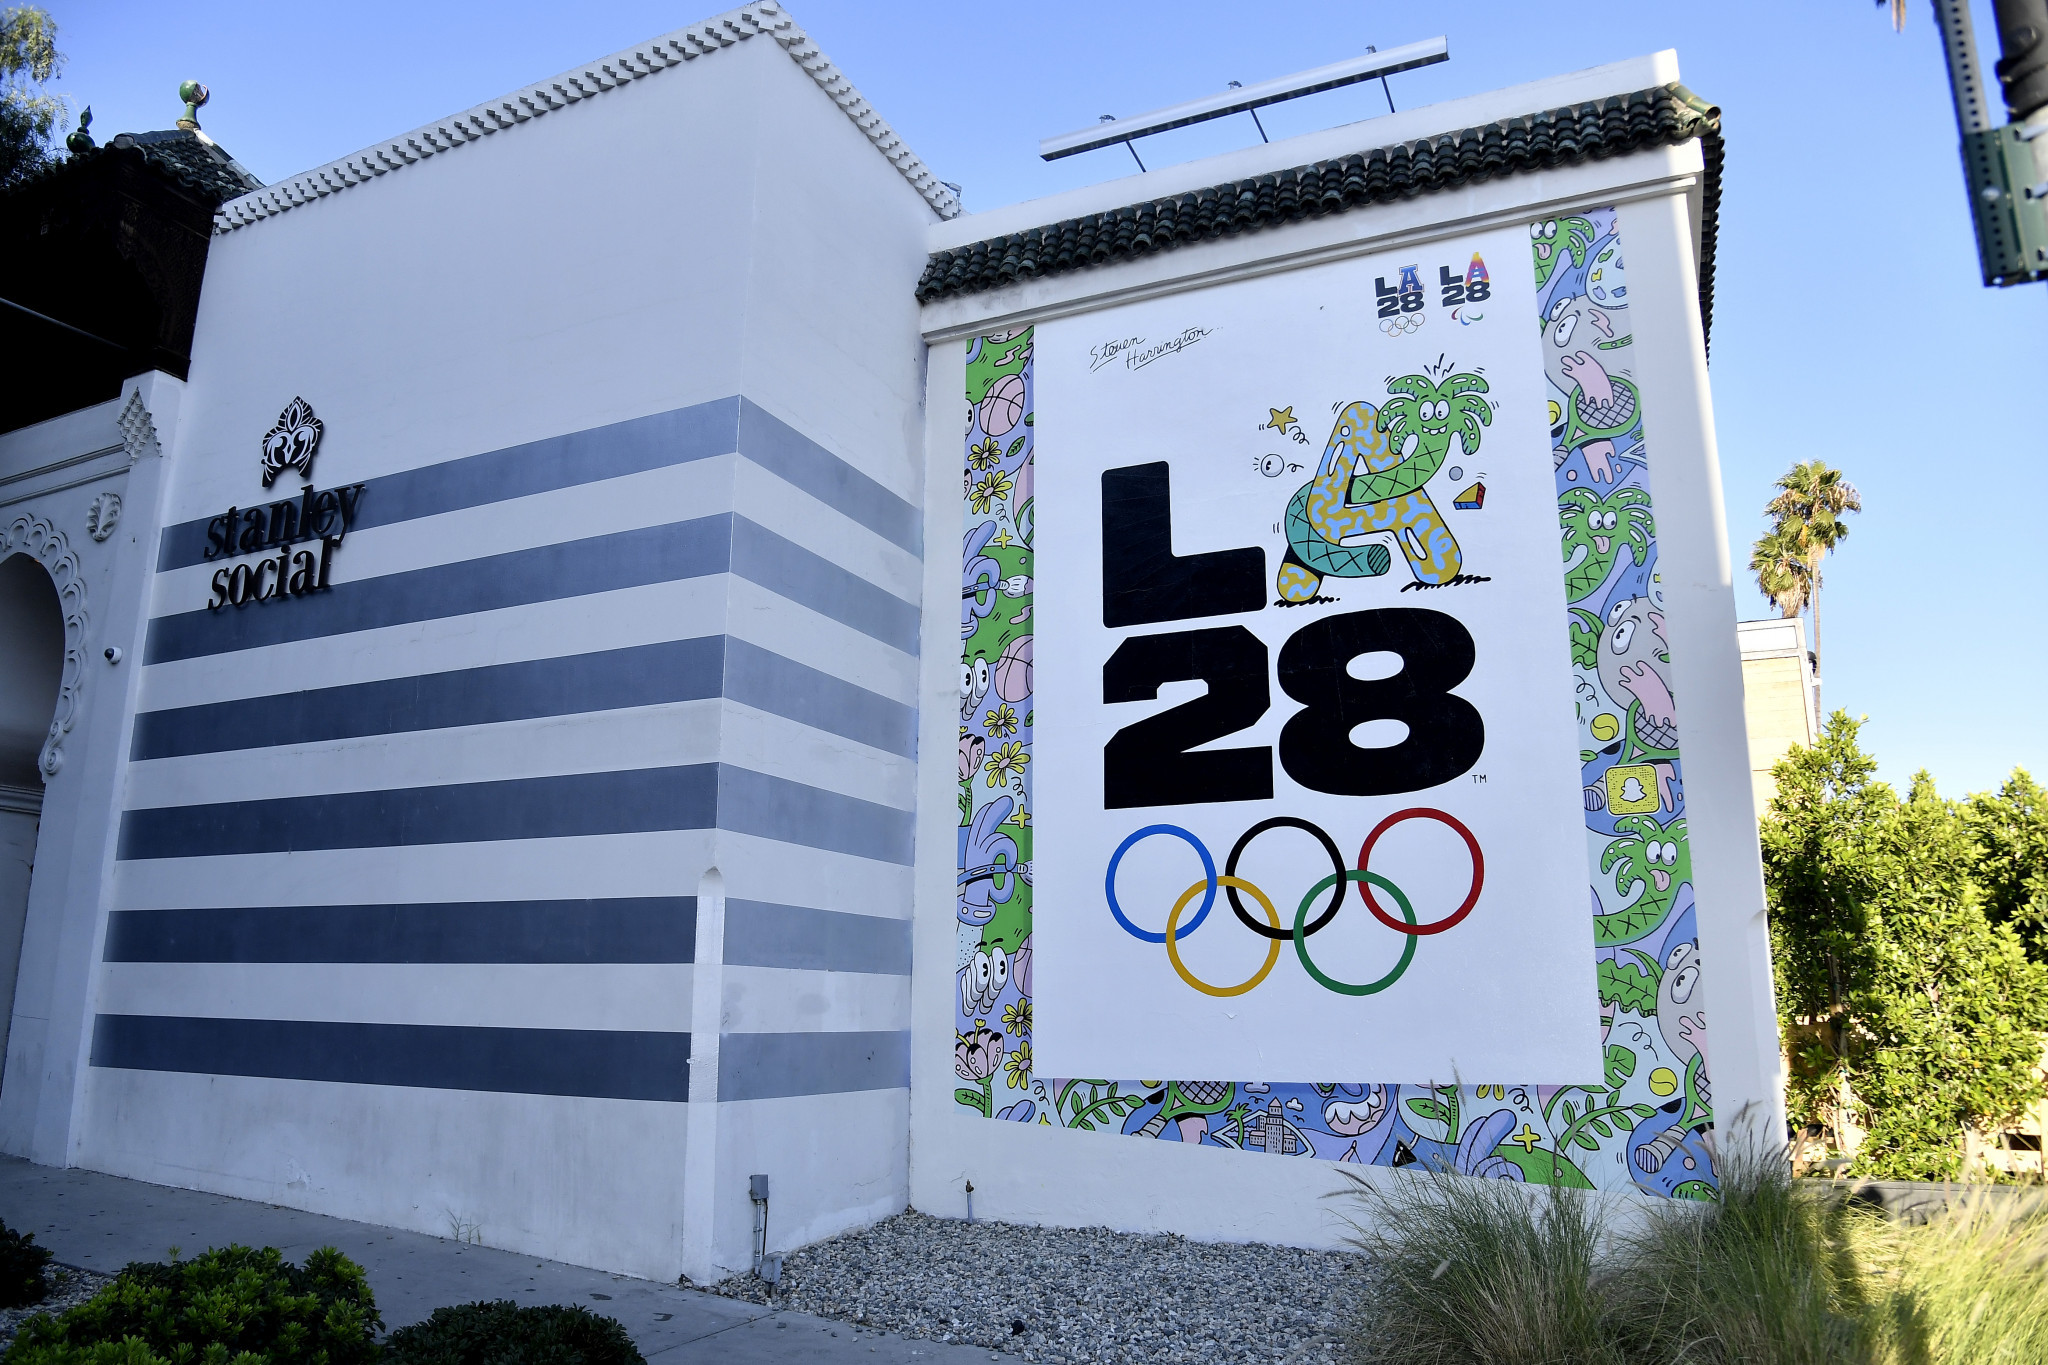 Los Angeles 2028 highlight financial reserves and Games agreement in annual report